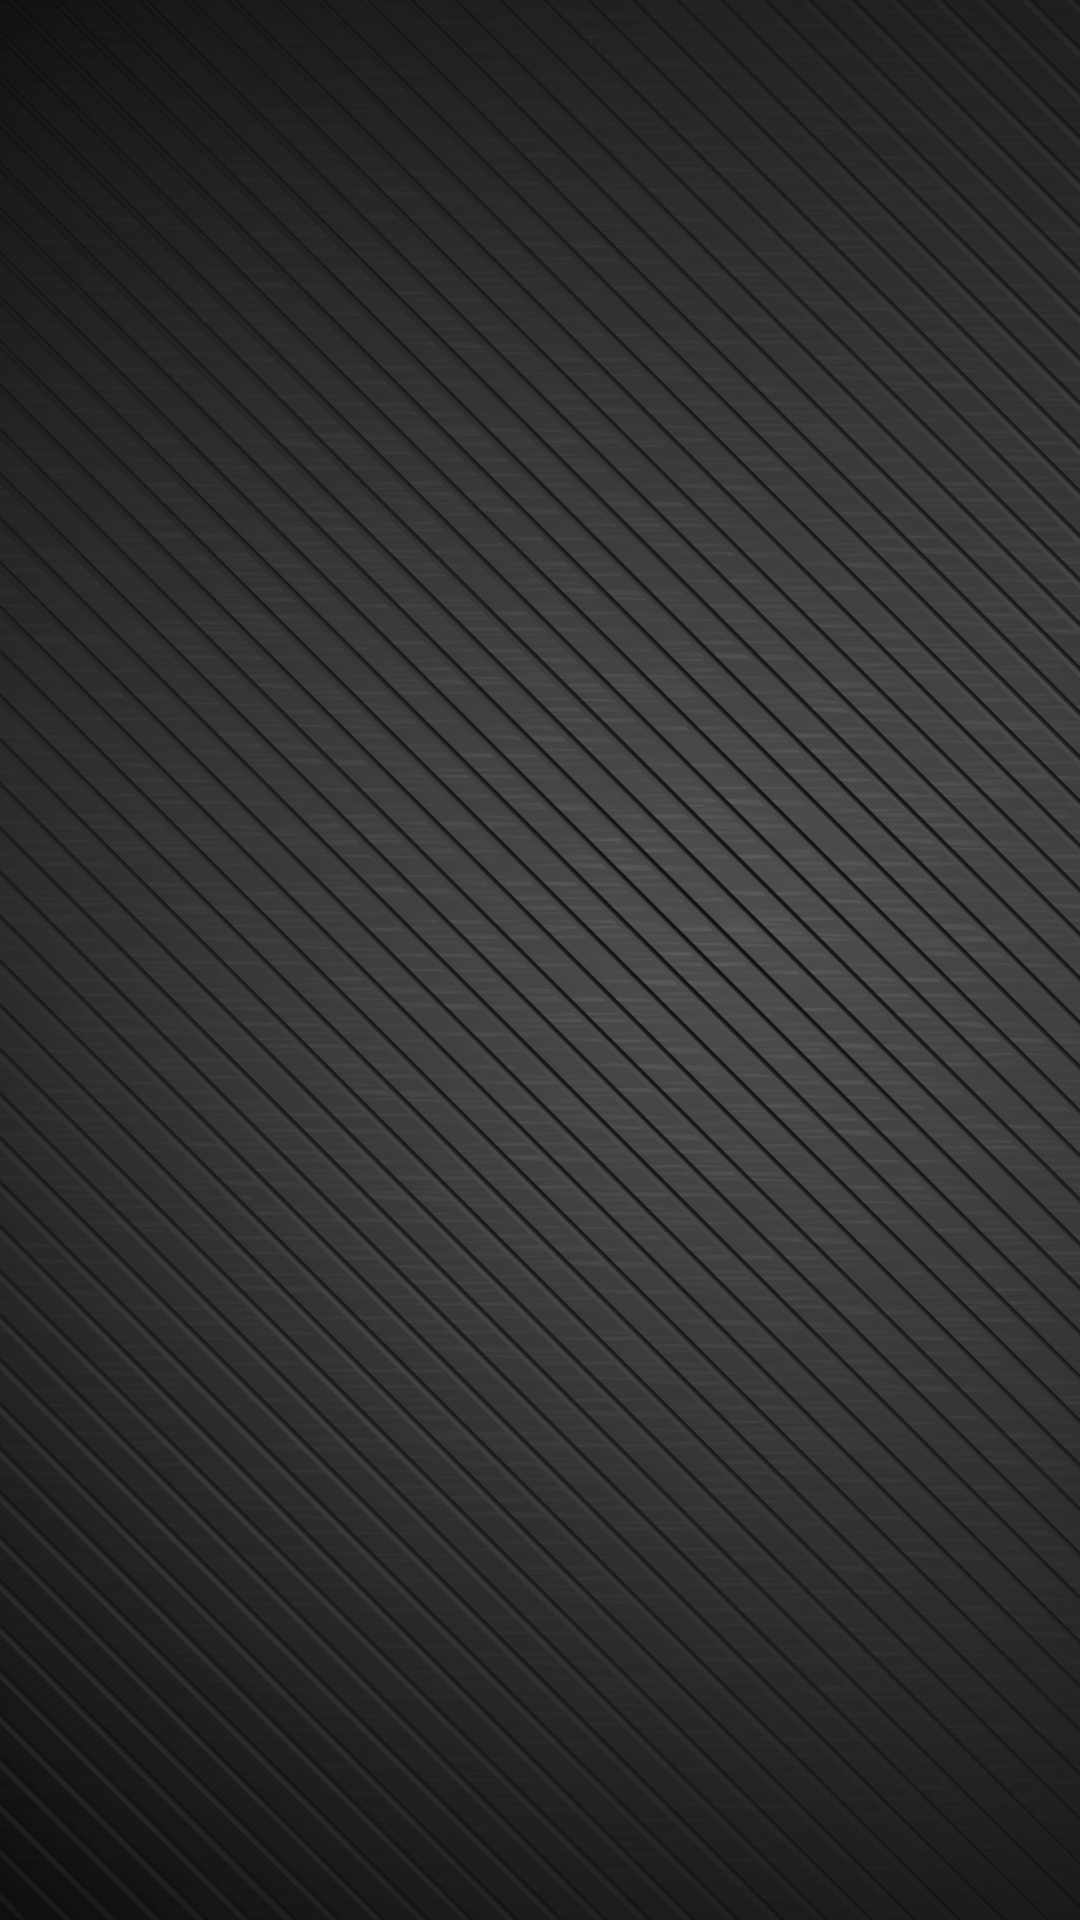 Download Our HD Striped Black Wallpaper For Android Phones .0257